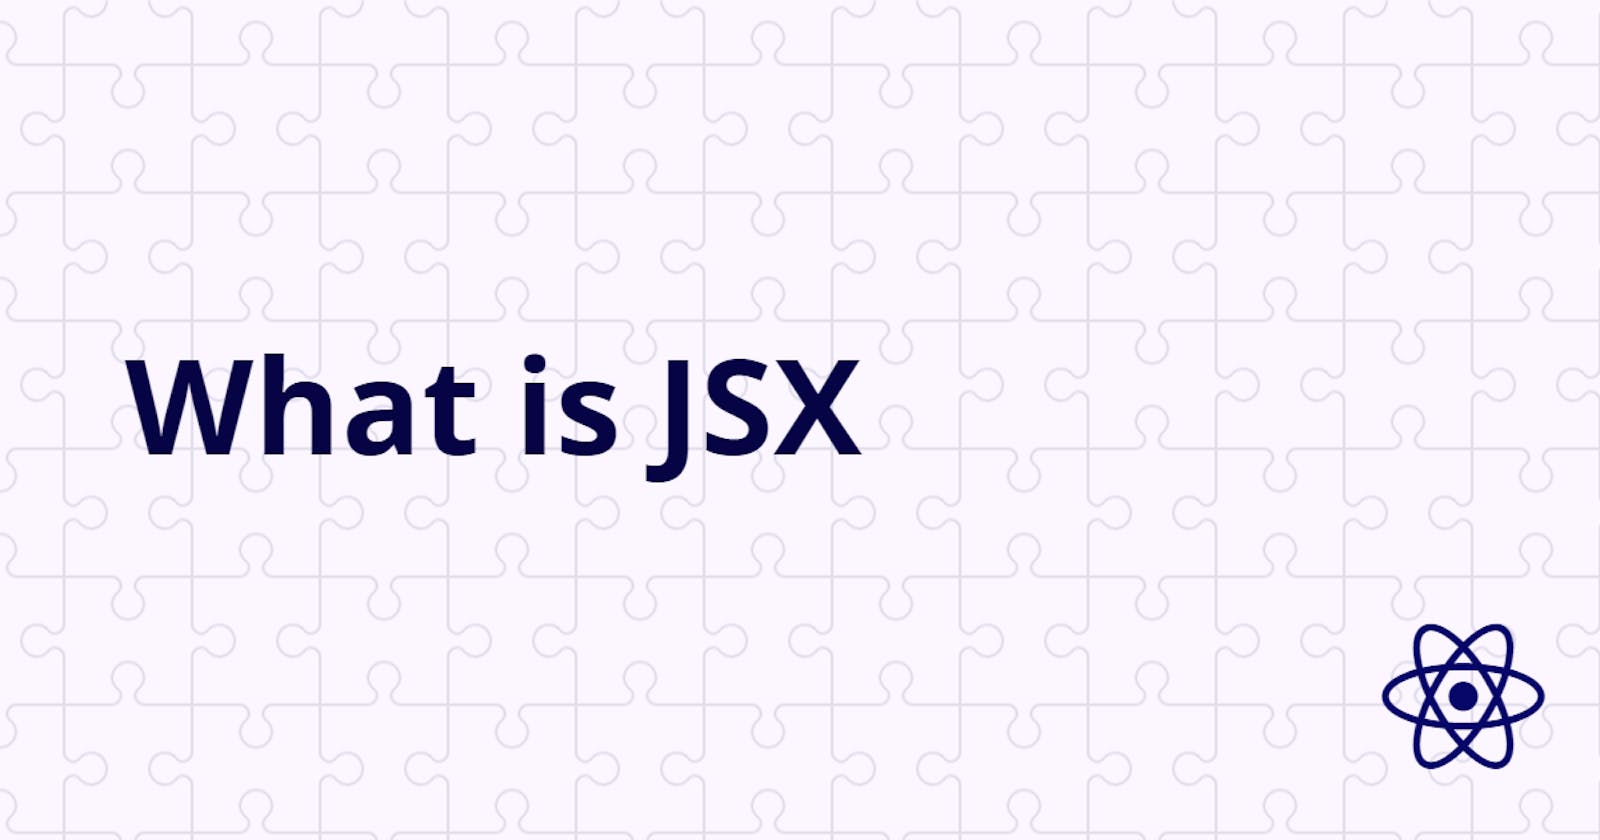 What is JSX?